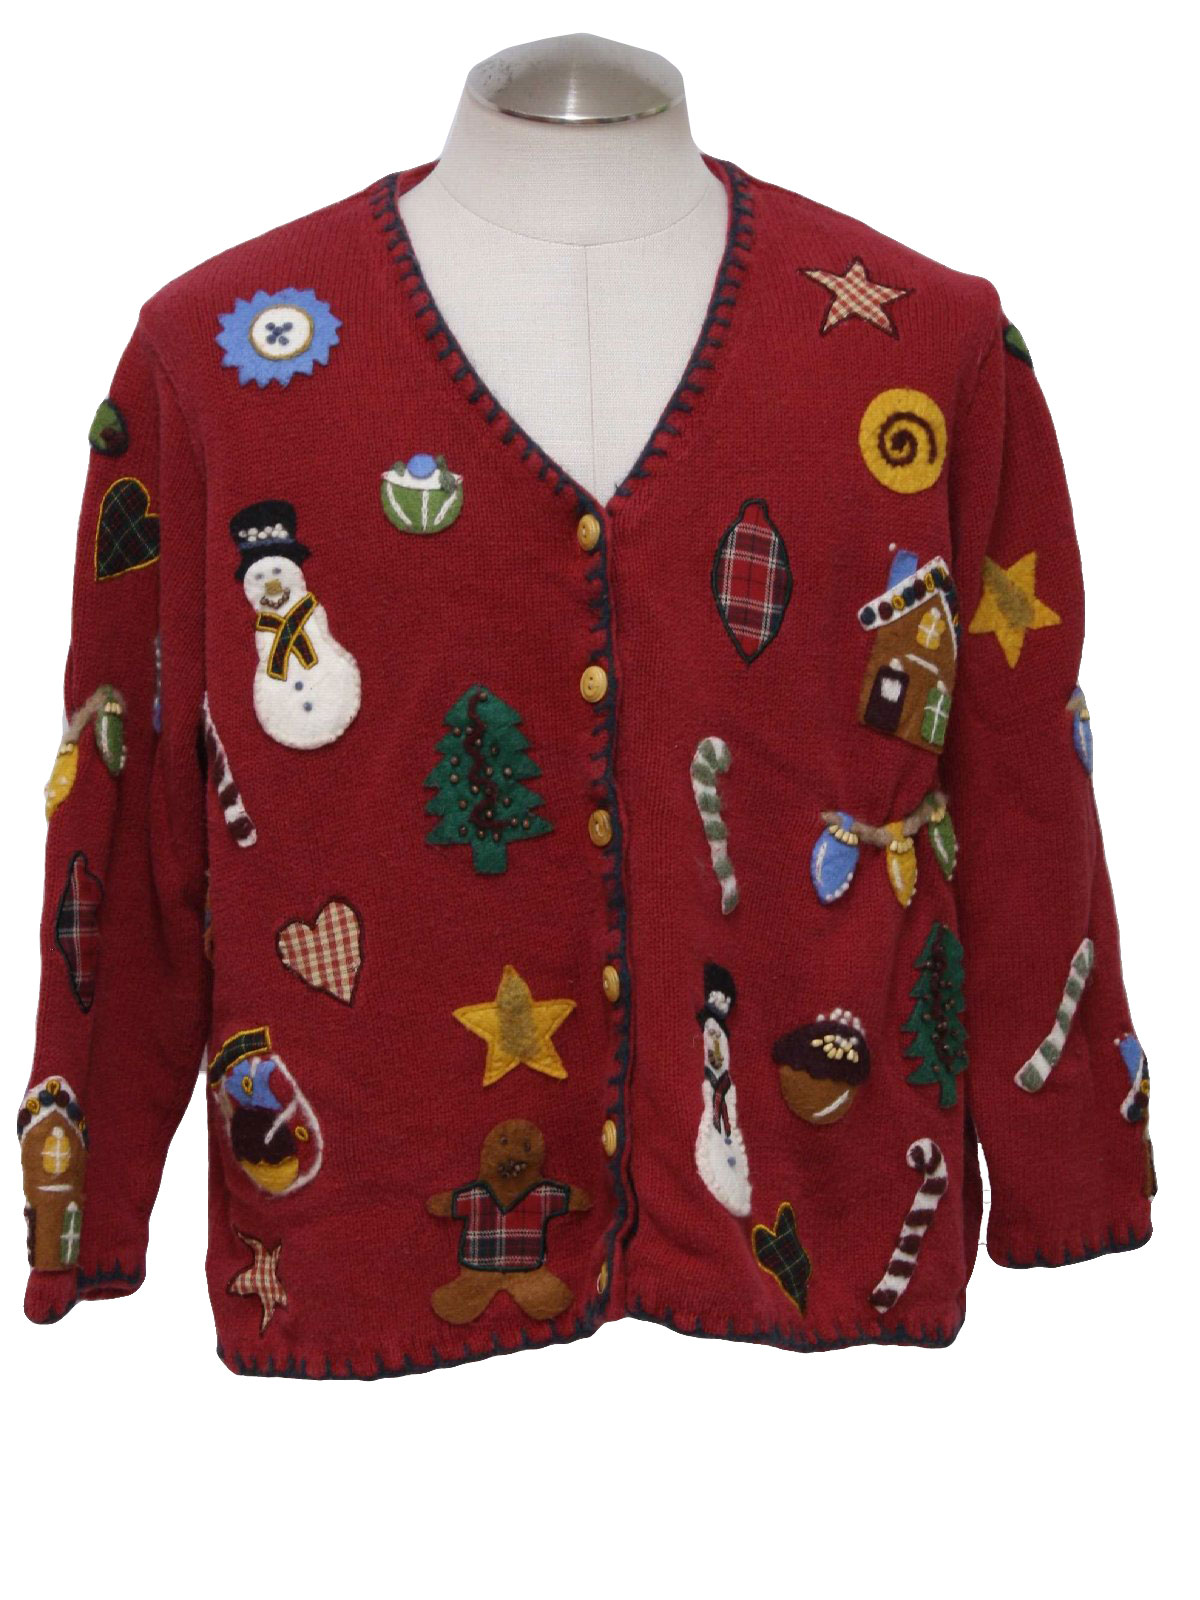 Ugly Christmas Cardigan Sweater: -No Label- Unisex red background with ...